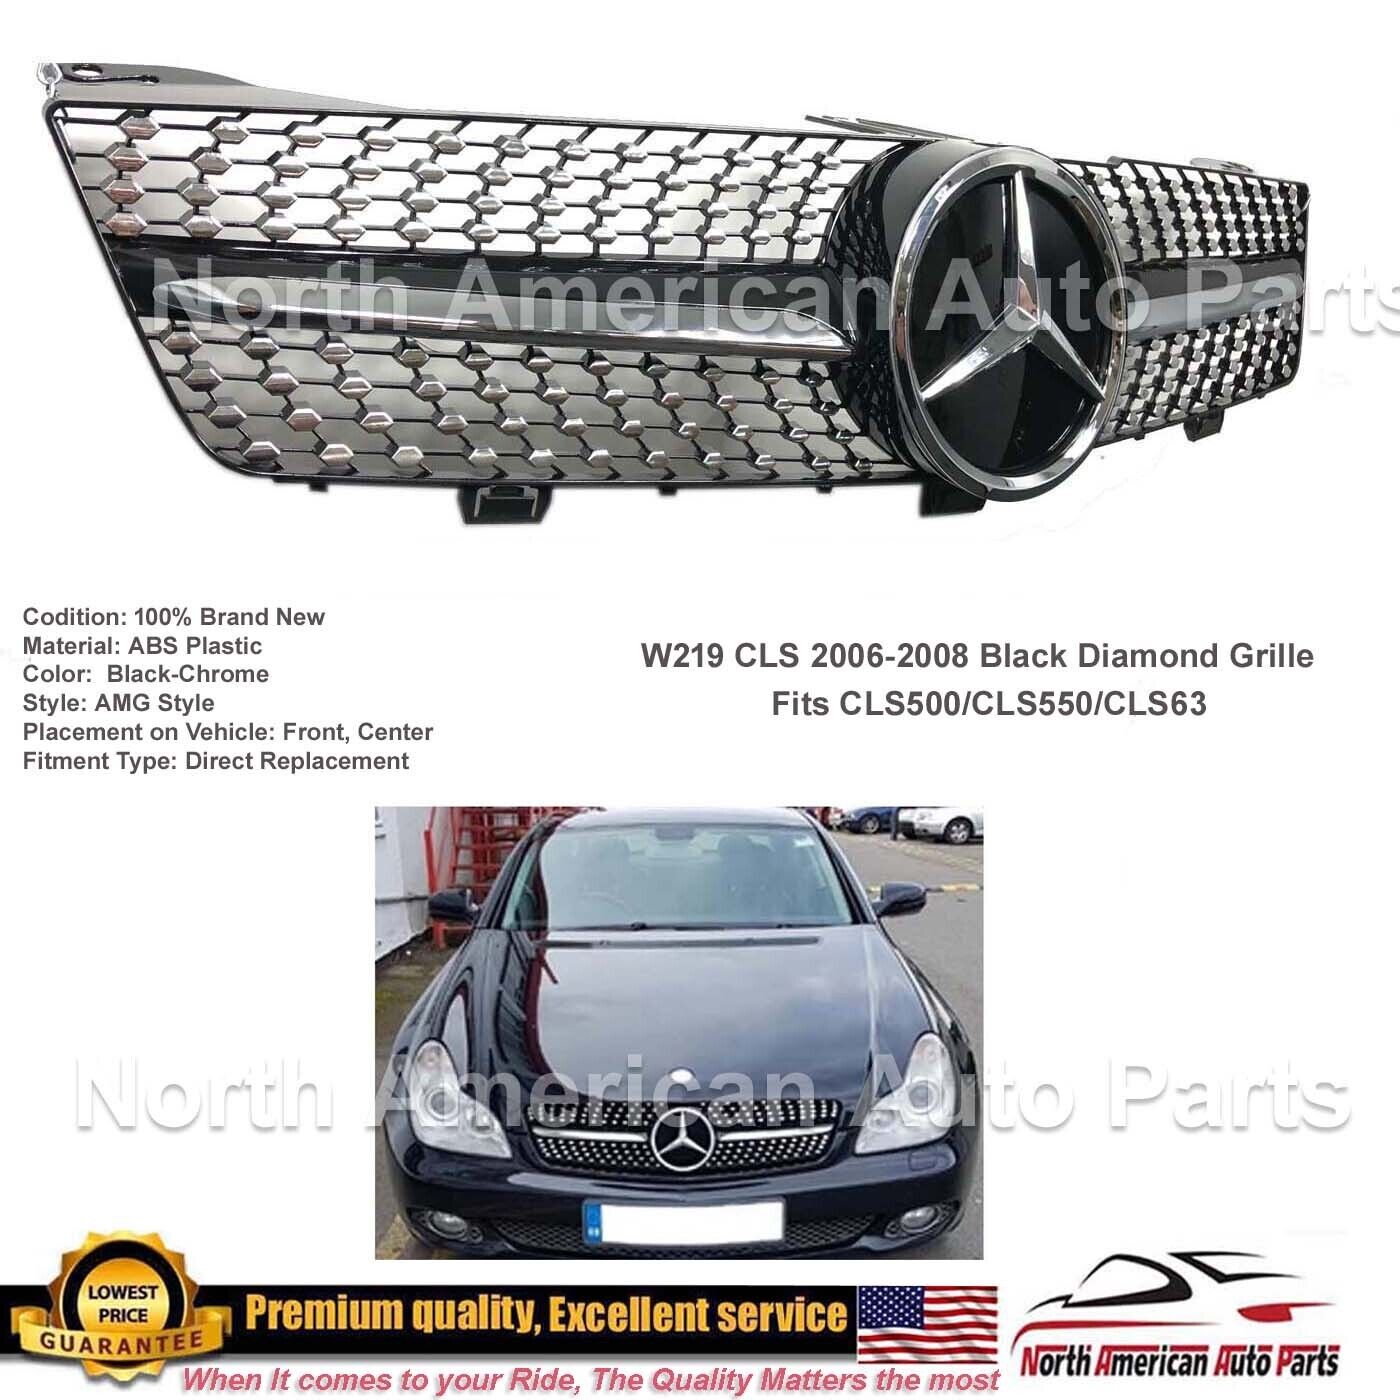 2006 2007 2008 CLS63 CLS500 CLS55 Black Diamond Grille CLS with Star New Part